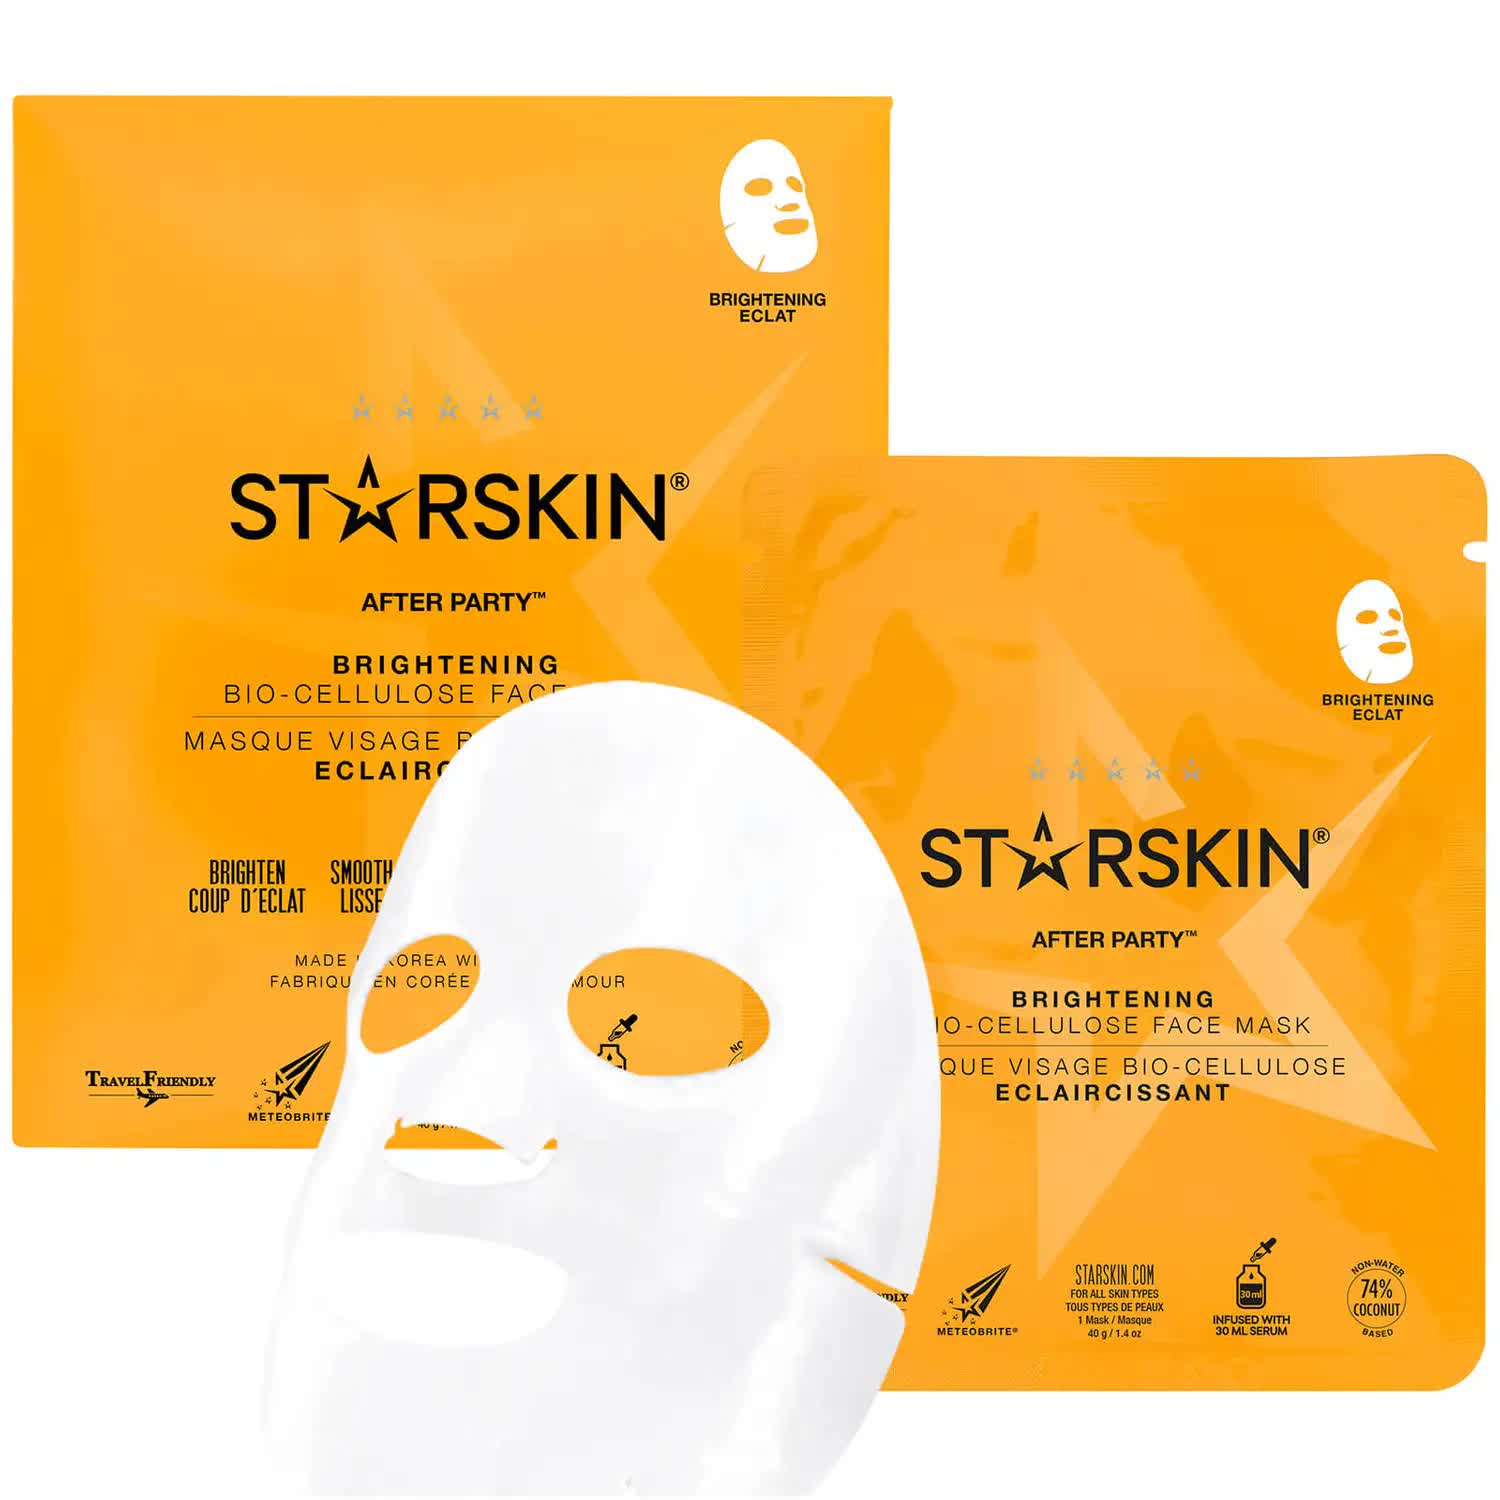 Starskin after party face mask.